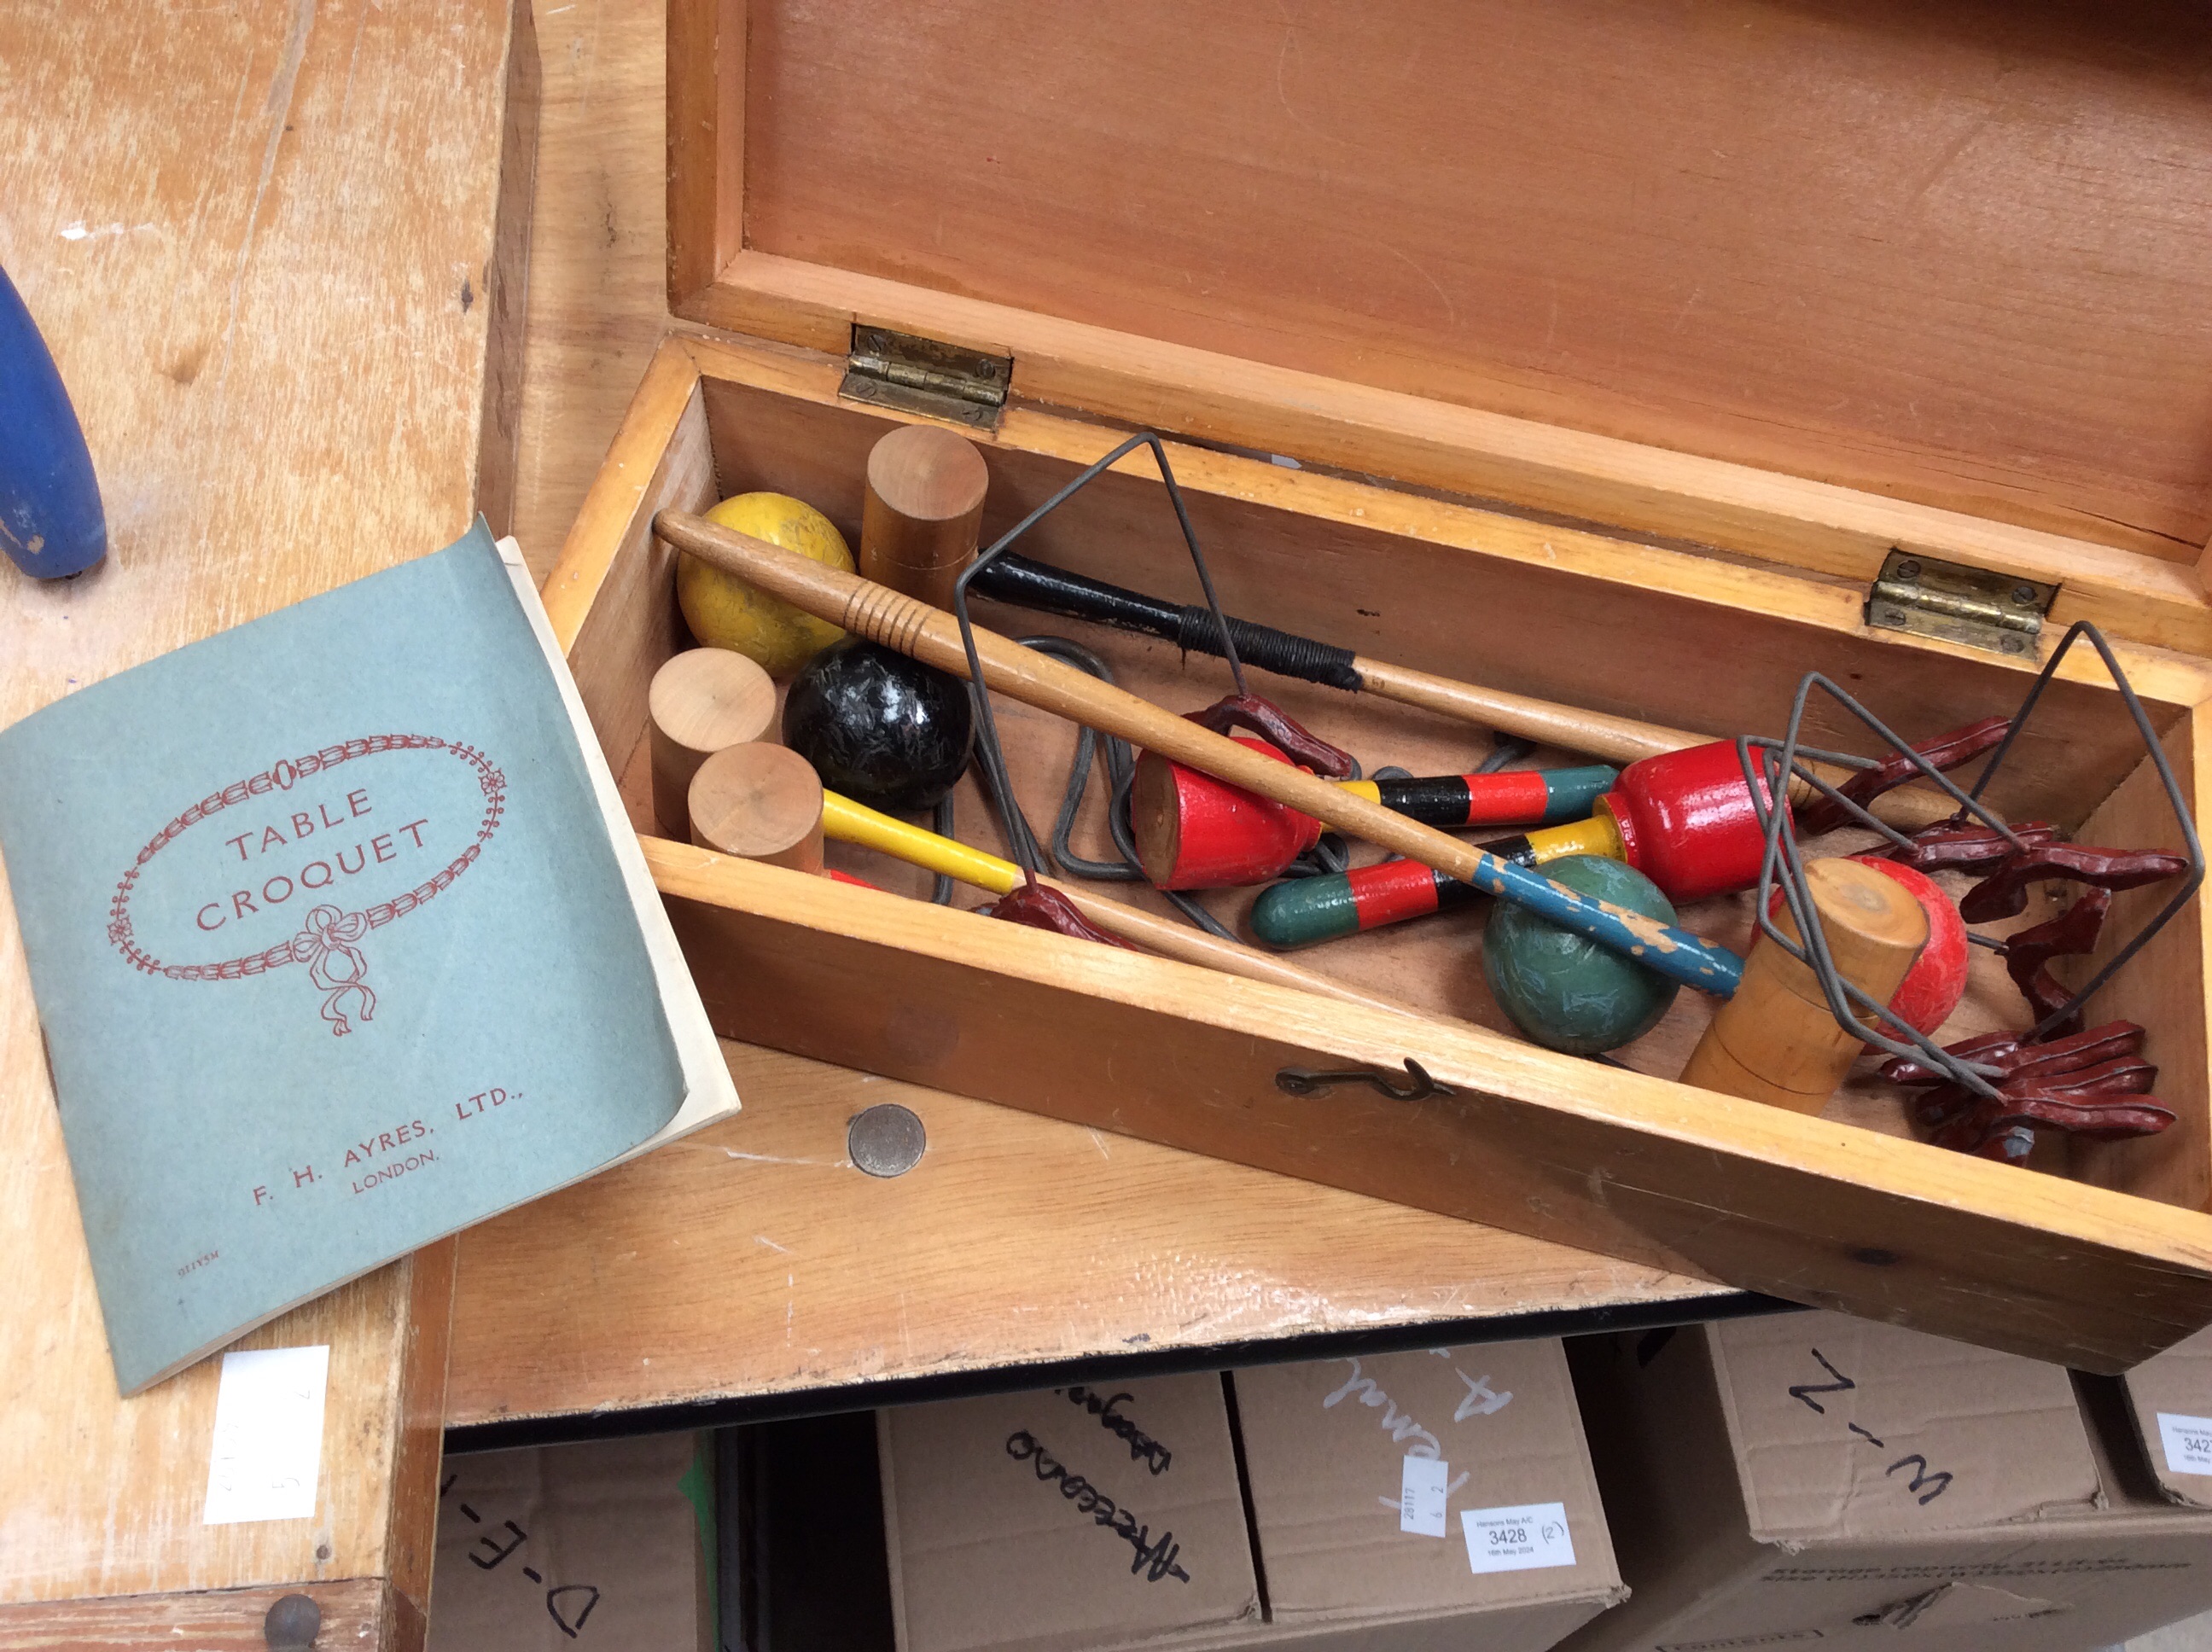 A table croquet set by F.H. Ayres Ltd, in box, along with a table skittles set, multicoloured - Image 2 of 2